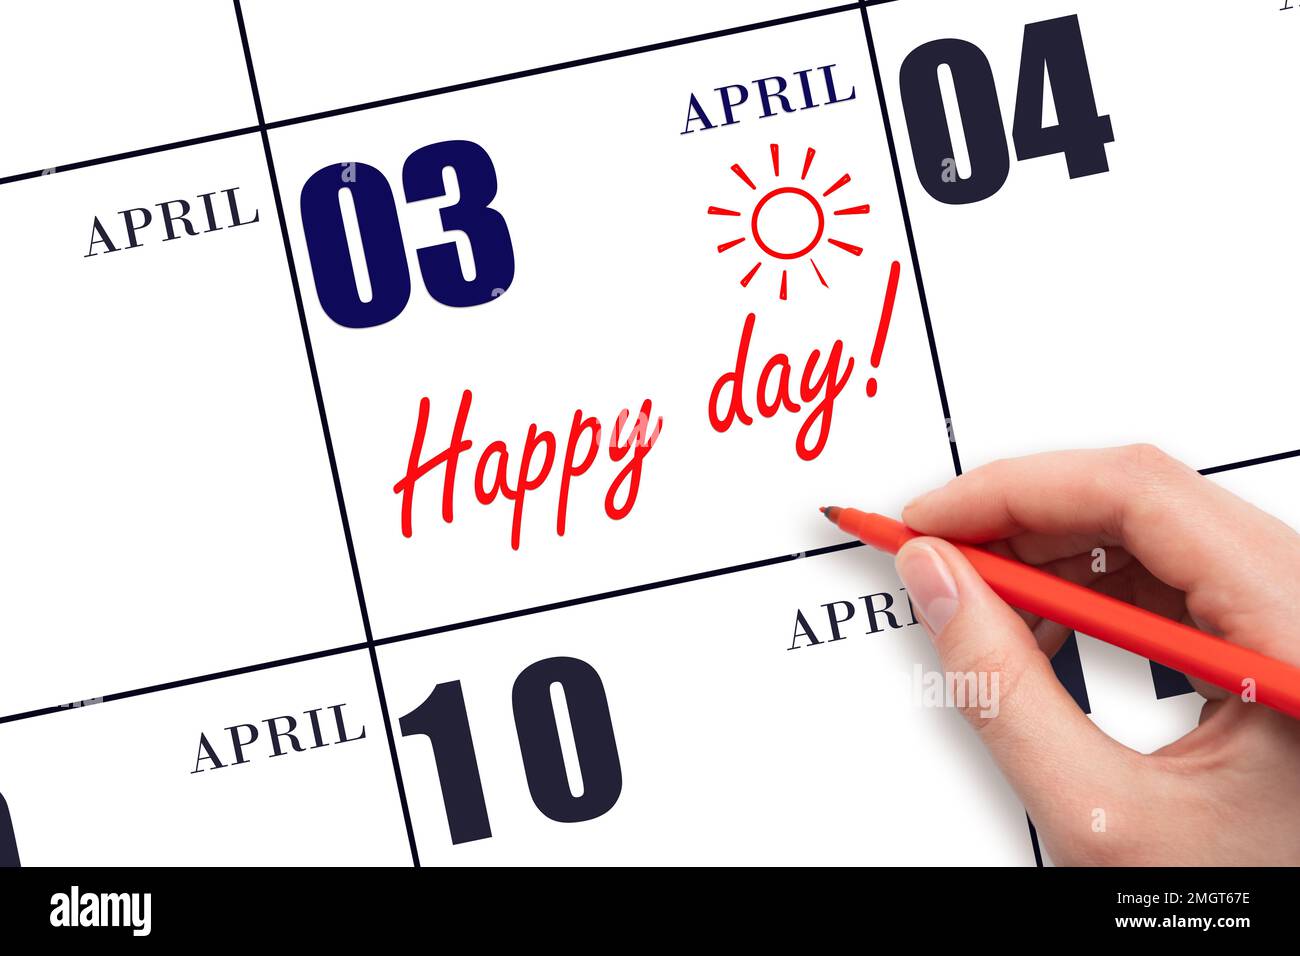 3rd day of April.  Hand writing the text HAPPY DAY and drawing the sun on the calendar date April 3. Save the date. Holiday. Motivation. Spring month, Stock Photo